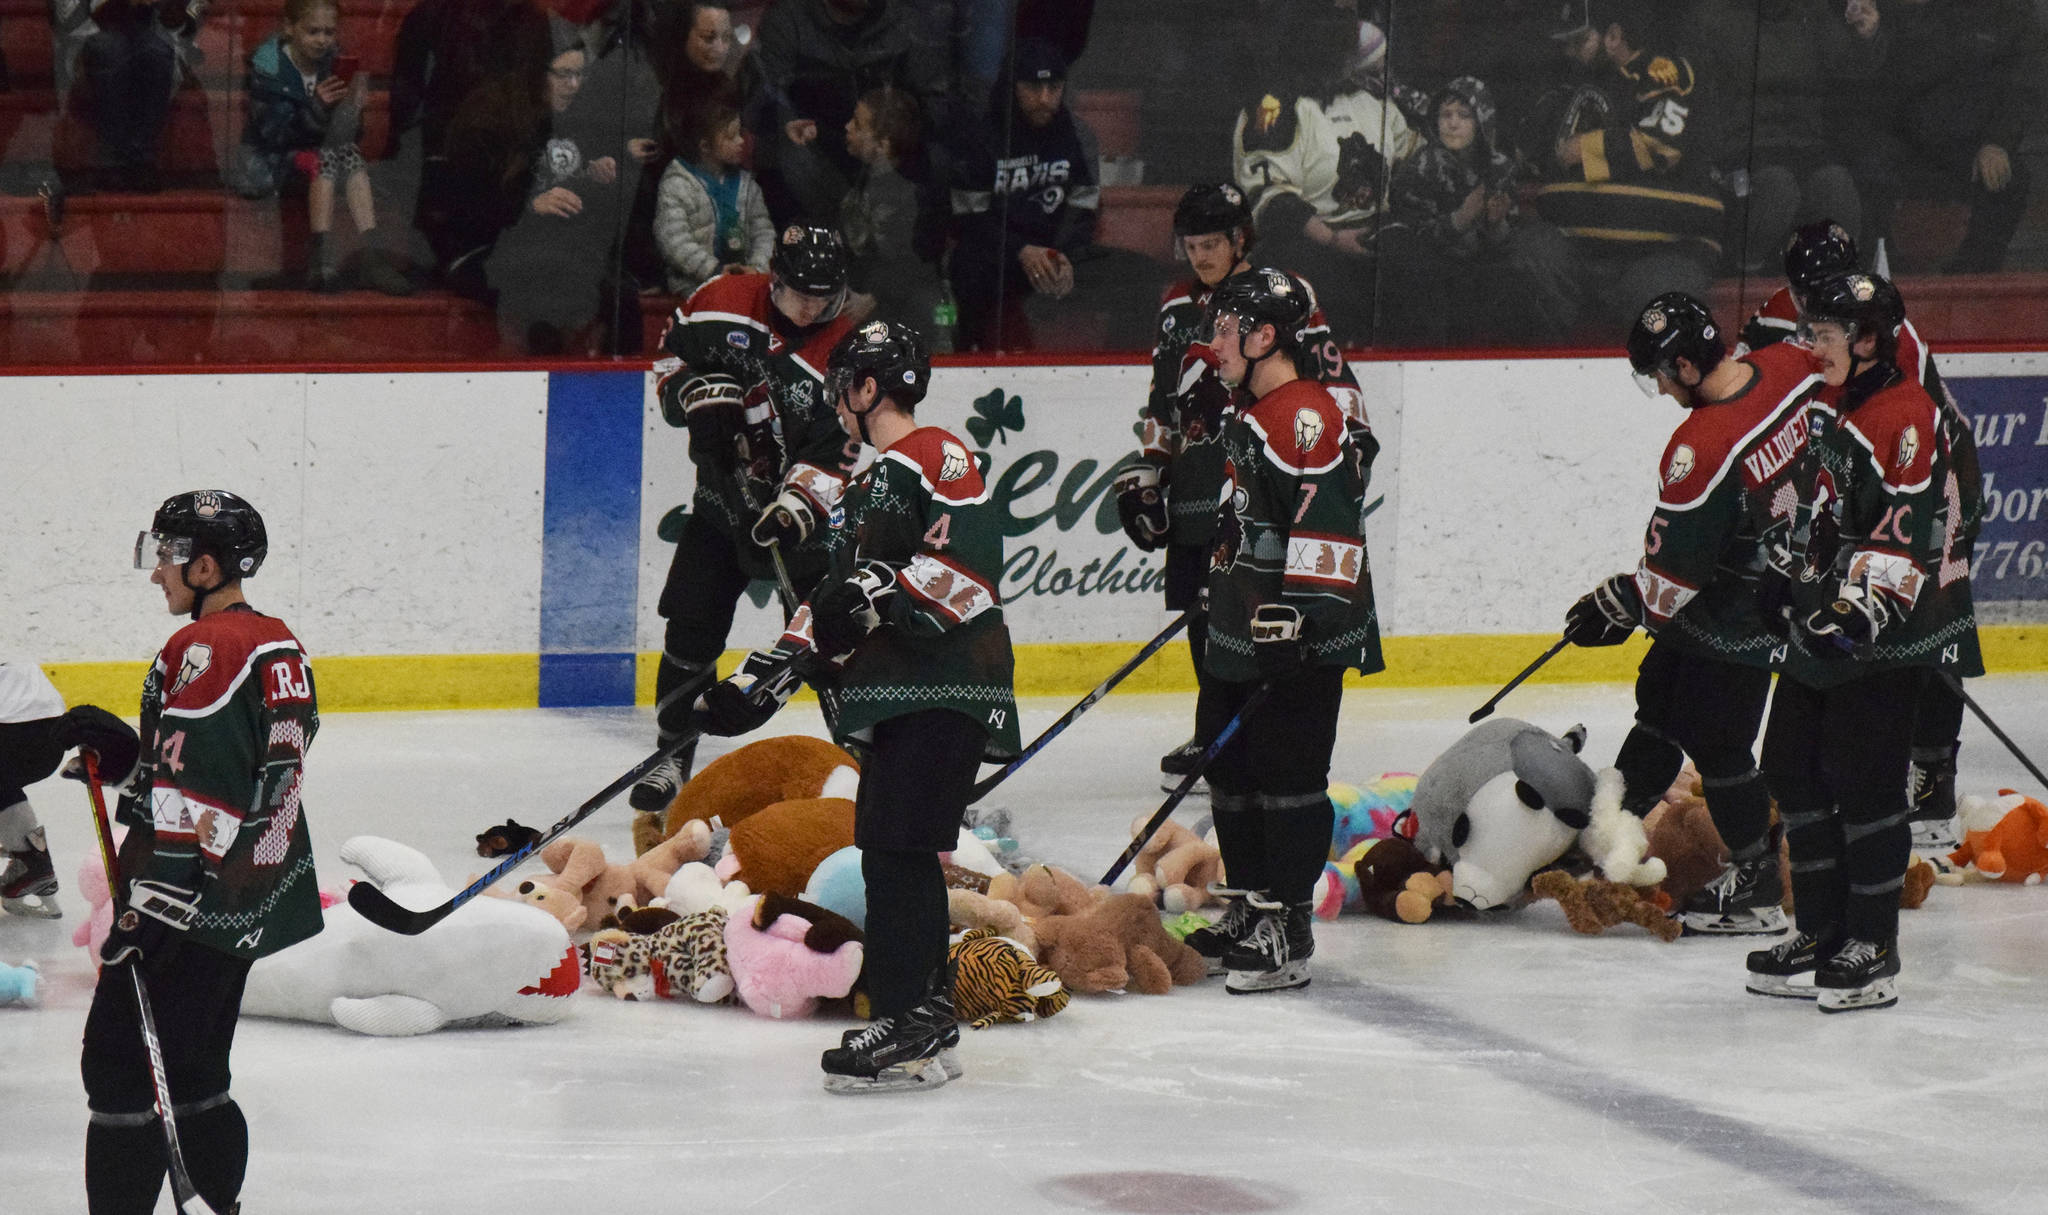 Kenai River players help clean up dozens of toy animals that were thrown onto the ice following the first goal between the Kenai River Brown Bears and Minnesota Magicians, Friday, Nov. 29, 2019, at the Soldotna Regional Sports Complex in Soldotna, Alaska. The stuffed animal toss was part of a charity event for the Salvation Army. (Photo by Joey Klecka/Peninsula Clarion)